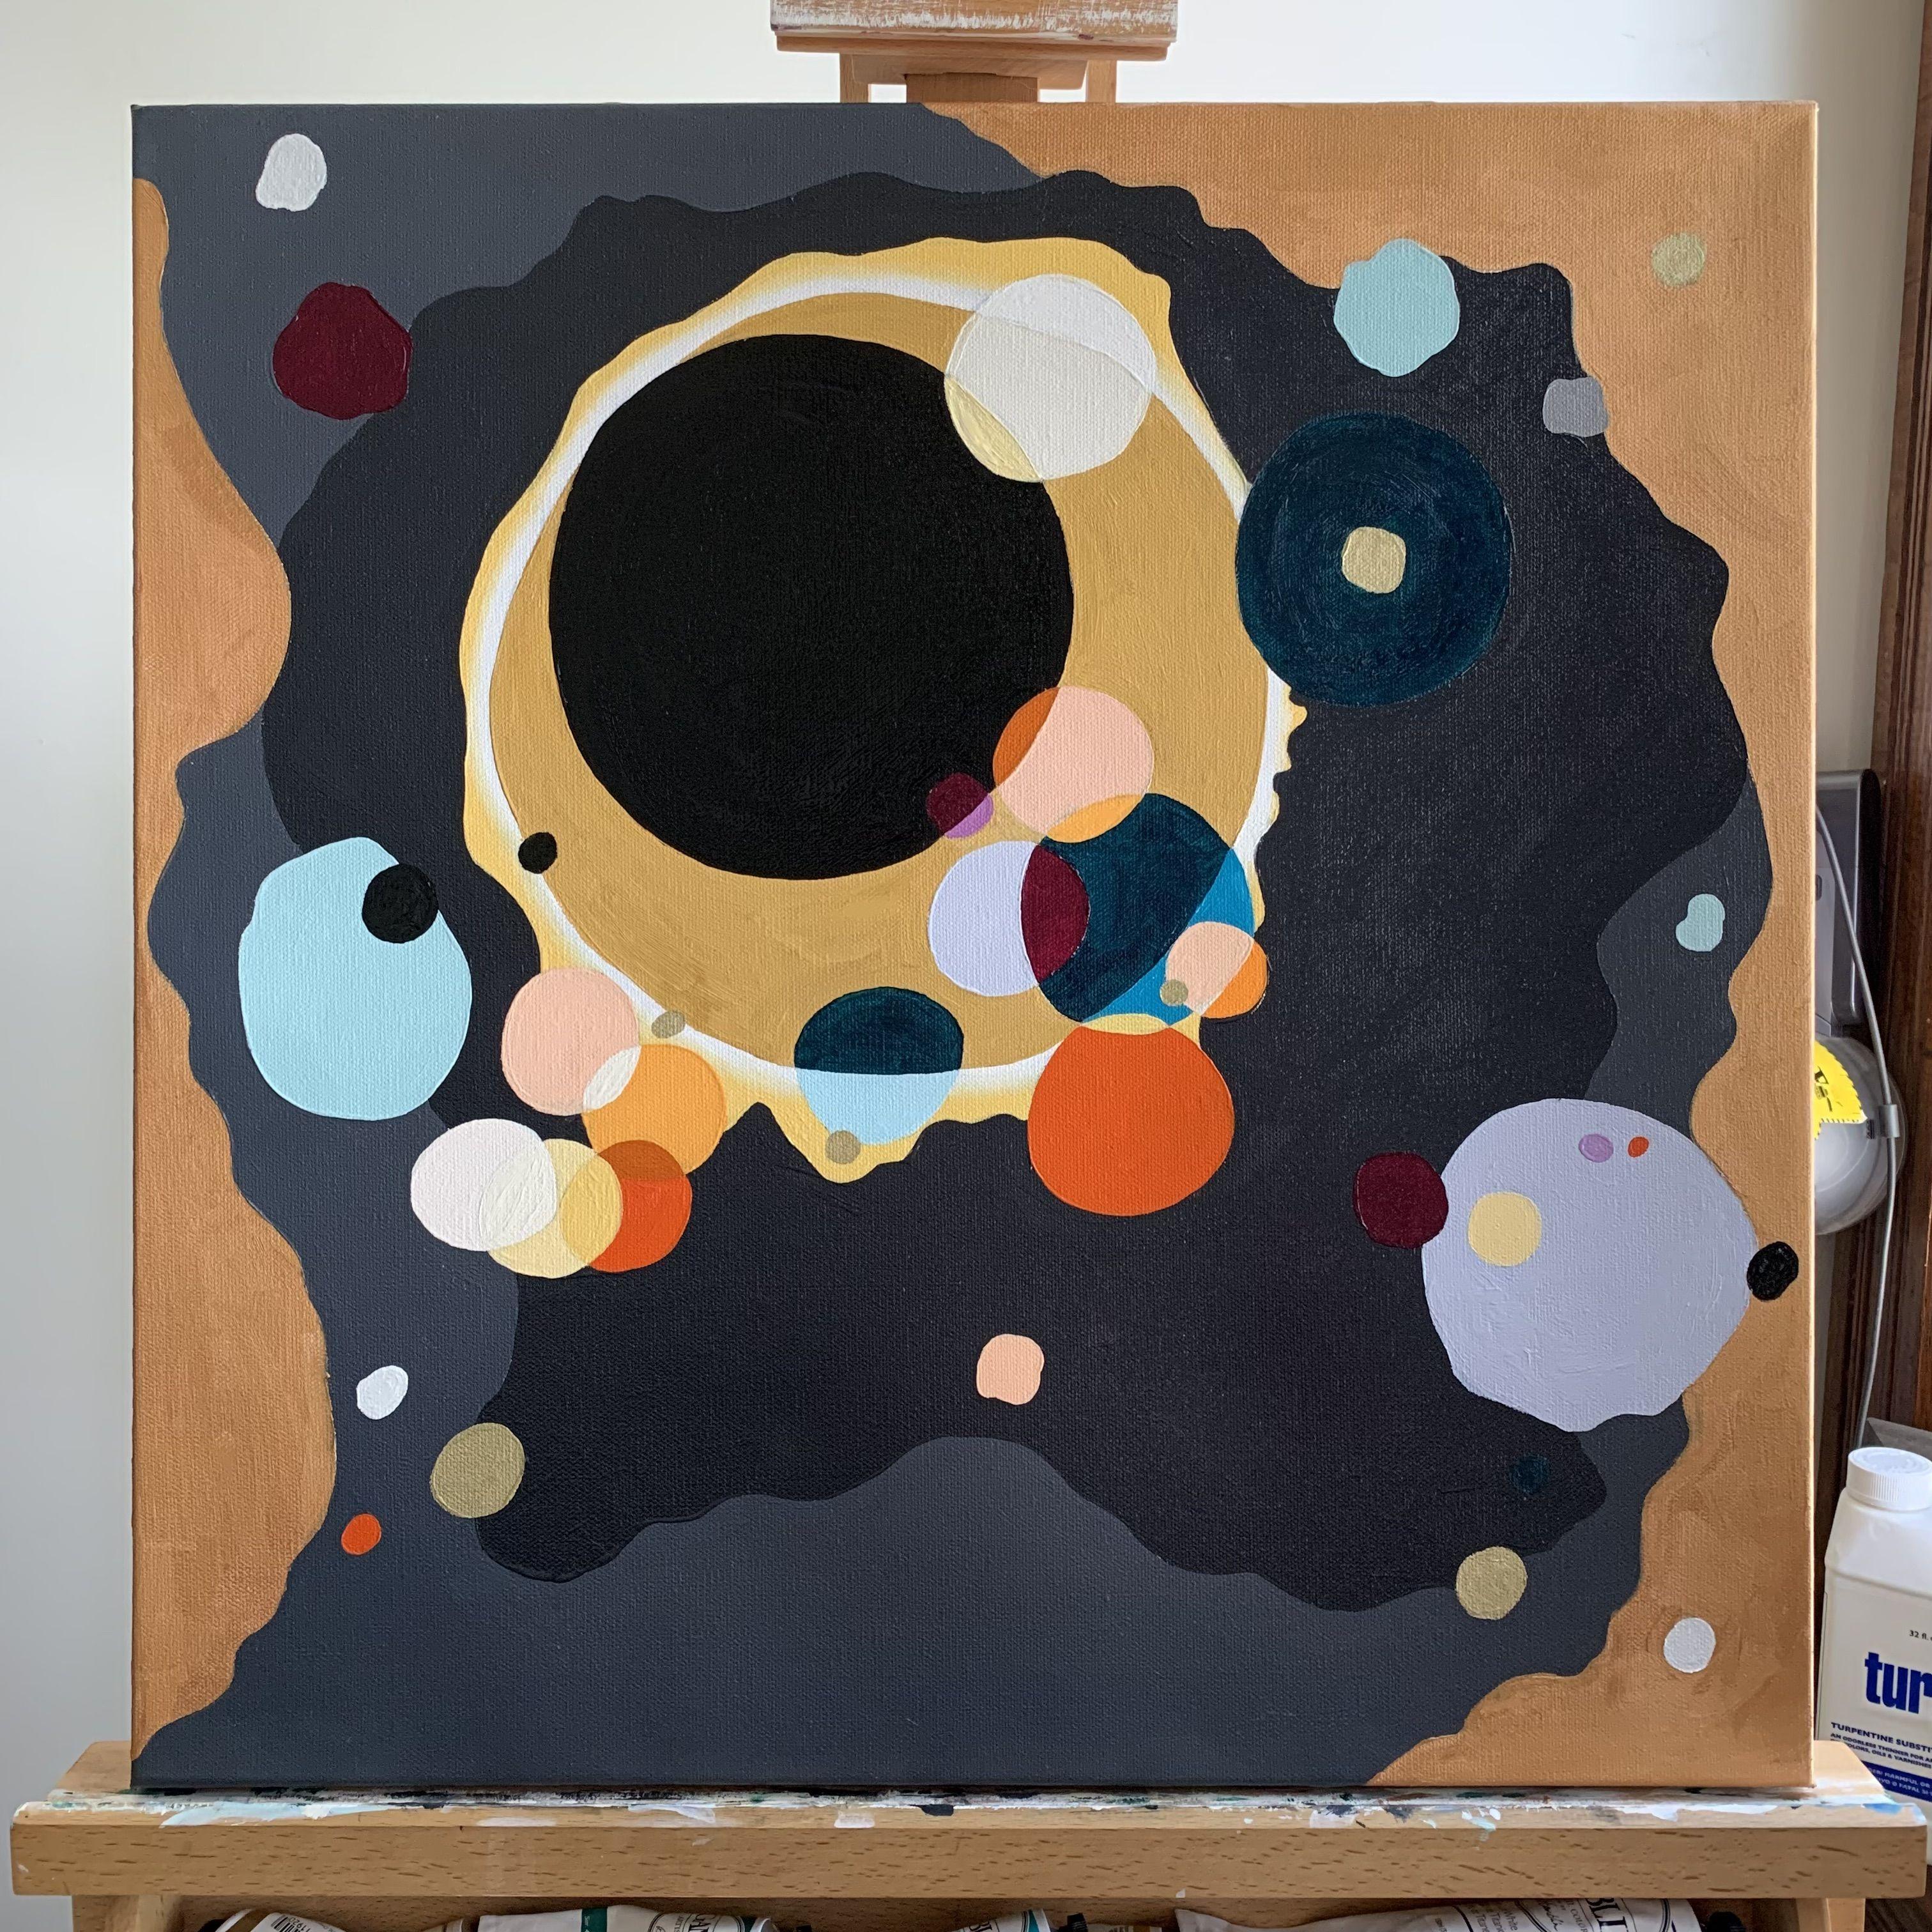 2022 / 24 x 30 / Oil on canvas    This piece is modeled after the original oil on canvas painting by Wassily Kandinsky.    A great cosmic order is formed by precisely placed circles in the original. These shapes become amorphous in my version,